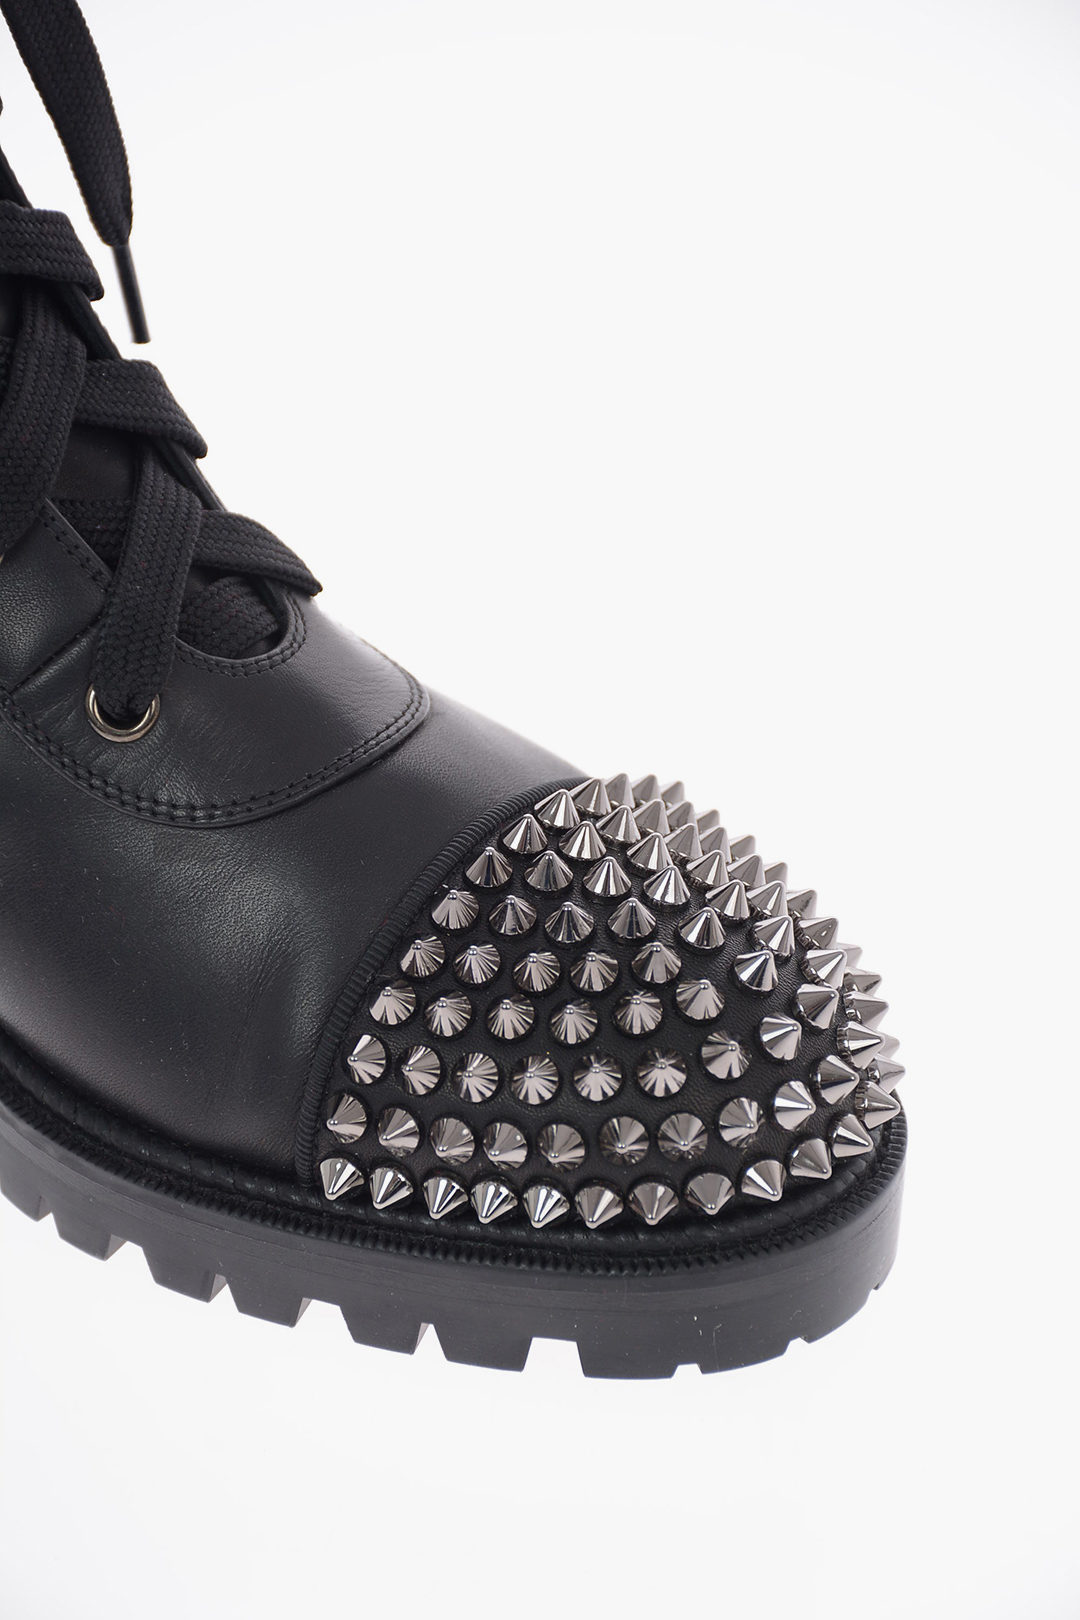 Christian Louboutin leather and studded Combat boots women - Glamood Outlet